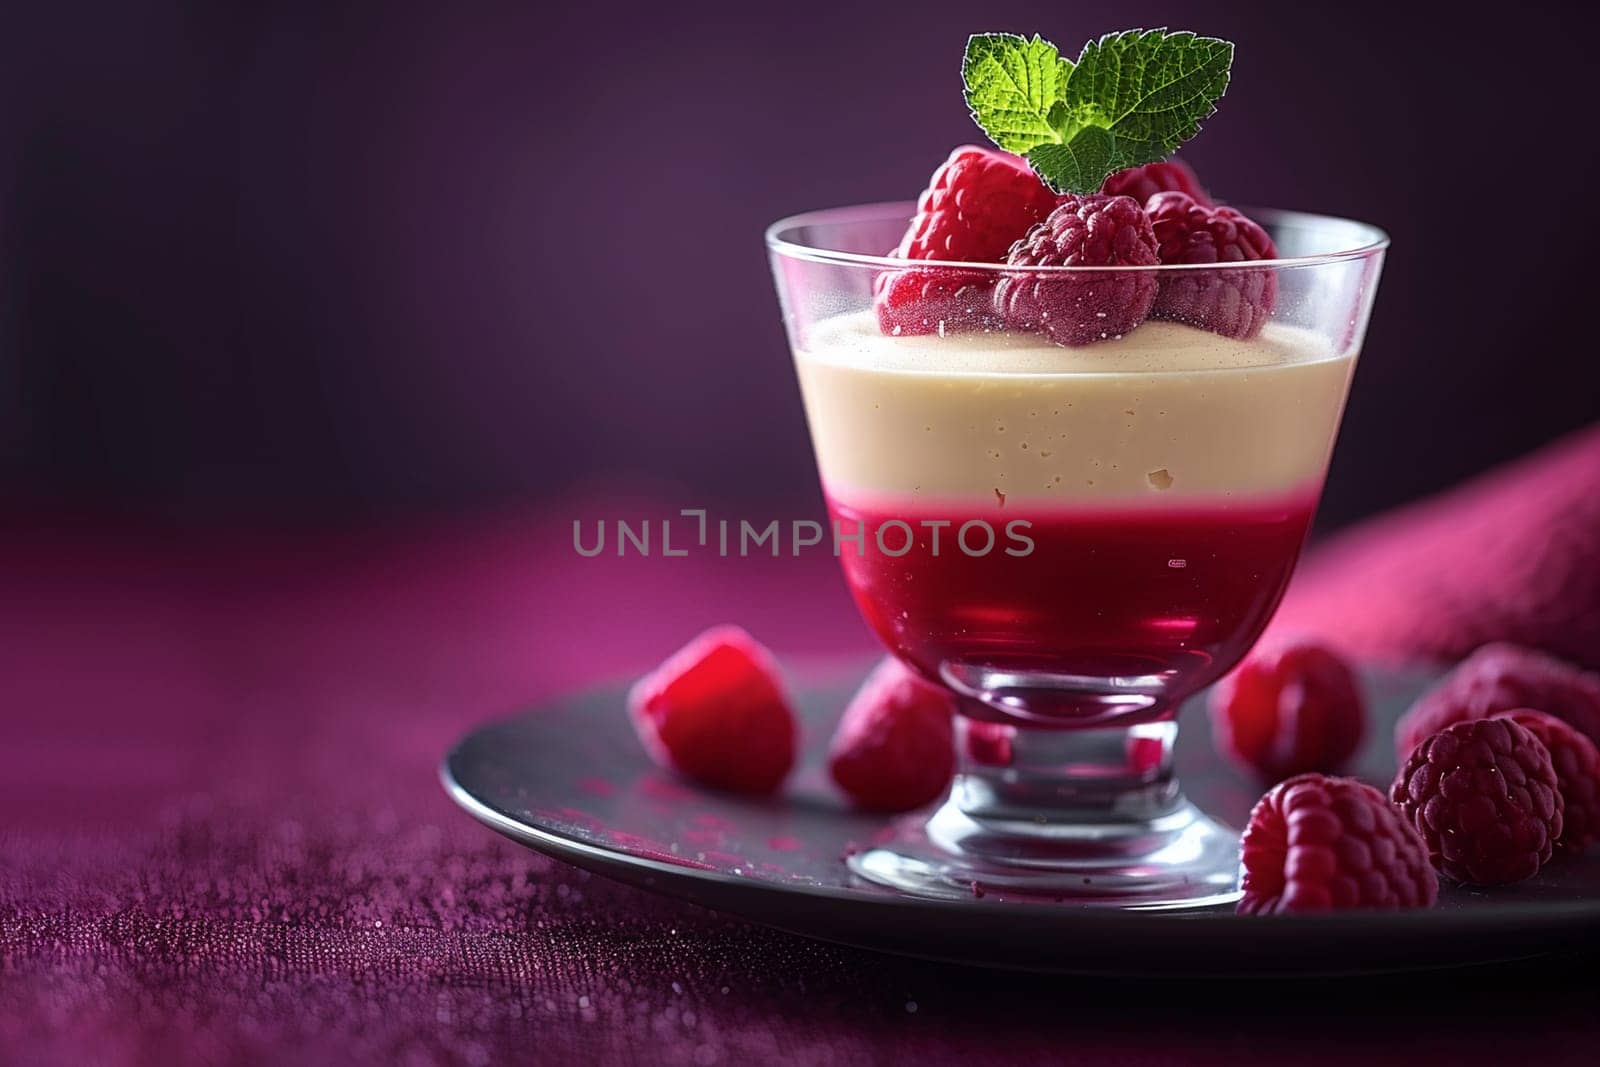 Stunning panna cotta with raspberry layer photographed on purple backdrop, garnished with mint leaf. Ideal for culinary presentations, blogs, or dessert menus.